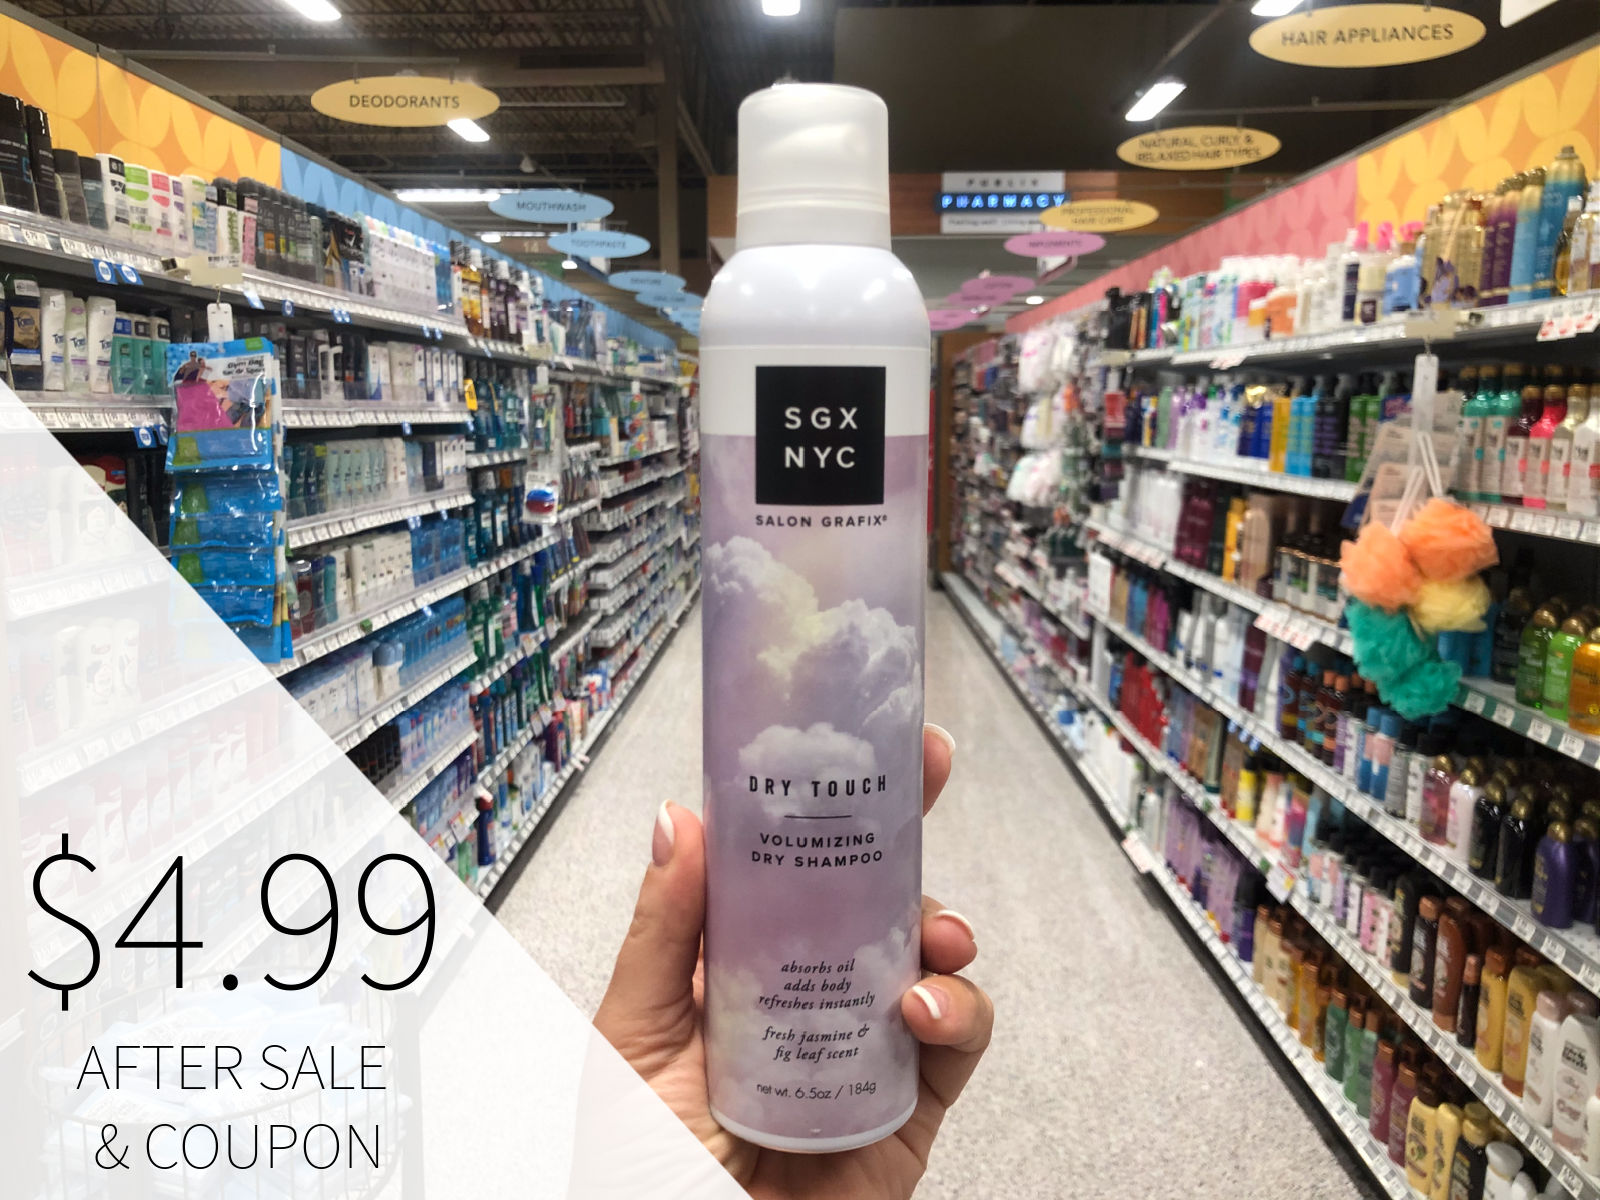 Super Deals On SGX NYC Haircare Items At Publix With The Sale AND Coupon Combo! on I Heart Publix 2